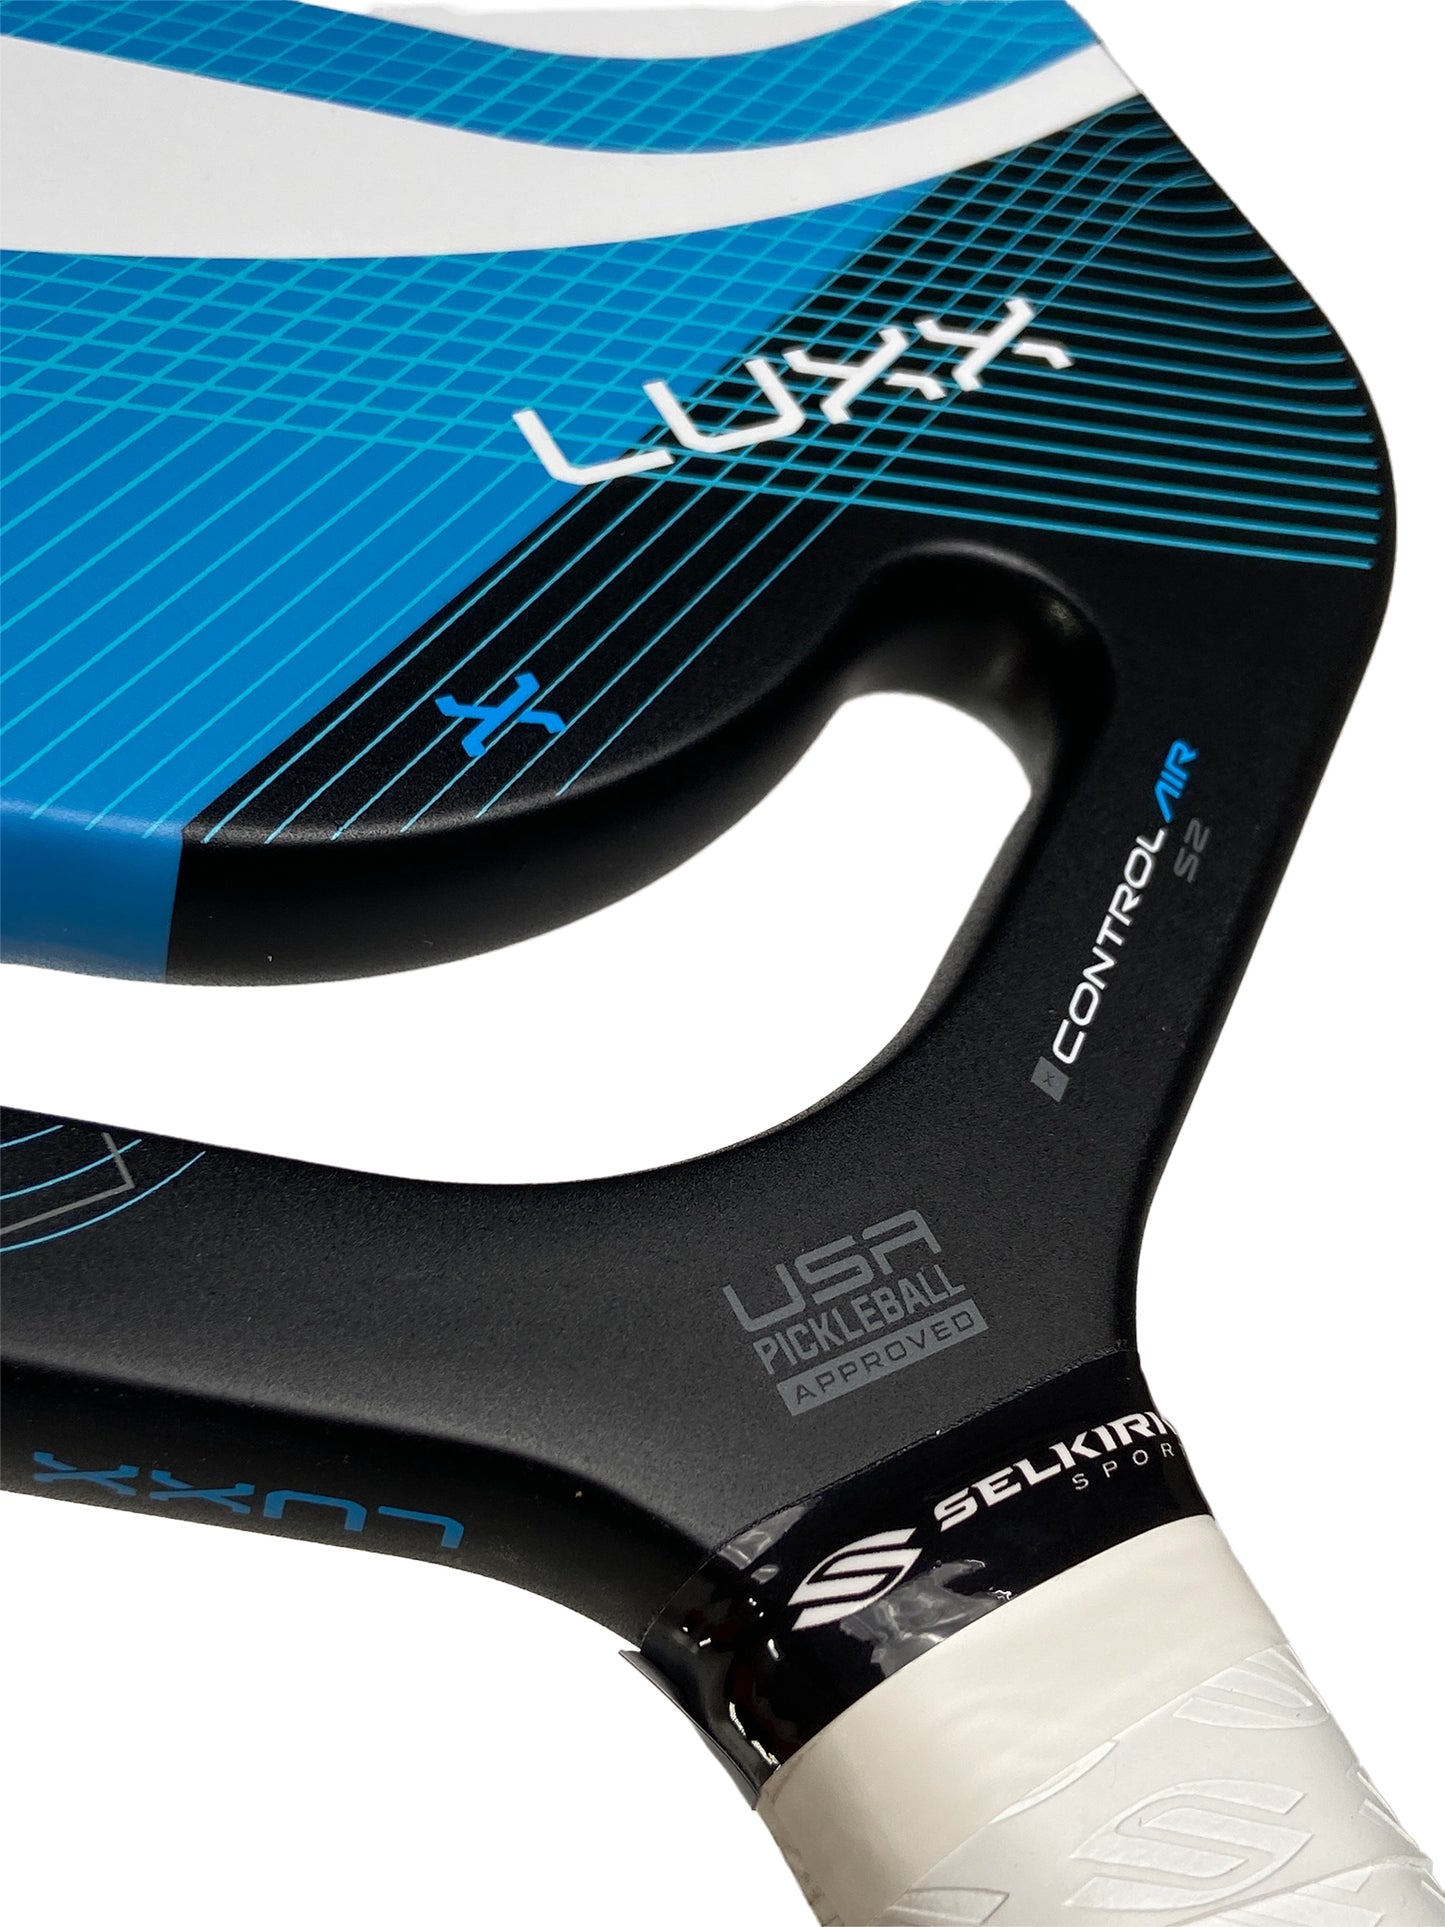 Selkirk LUXX Control Air S2